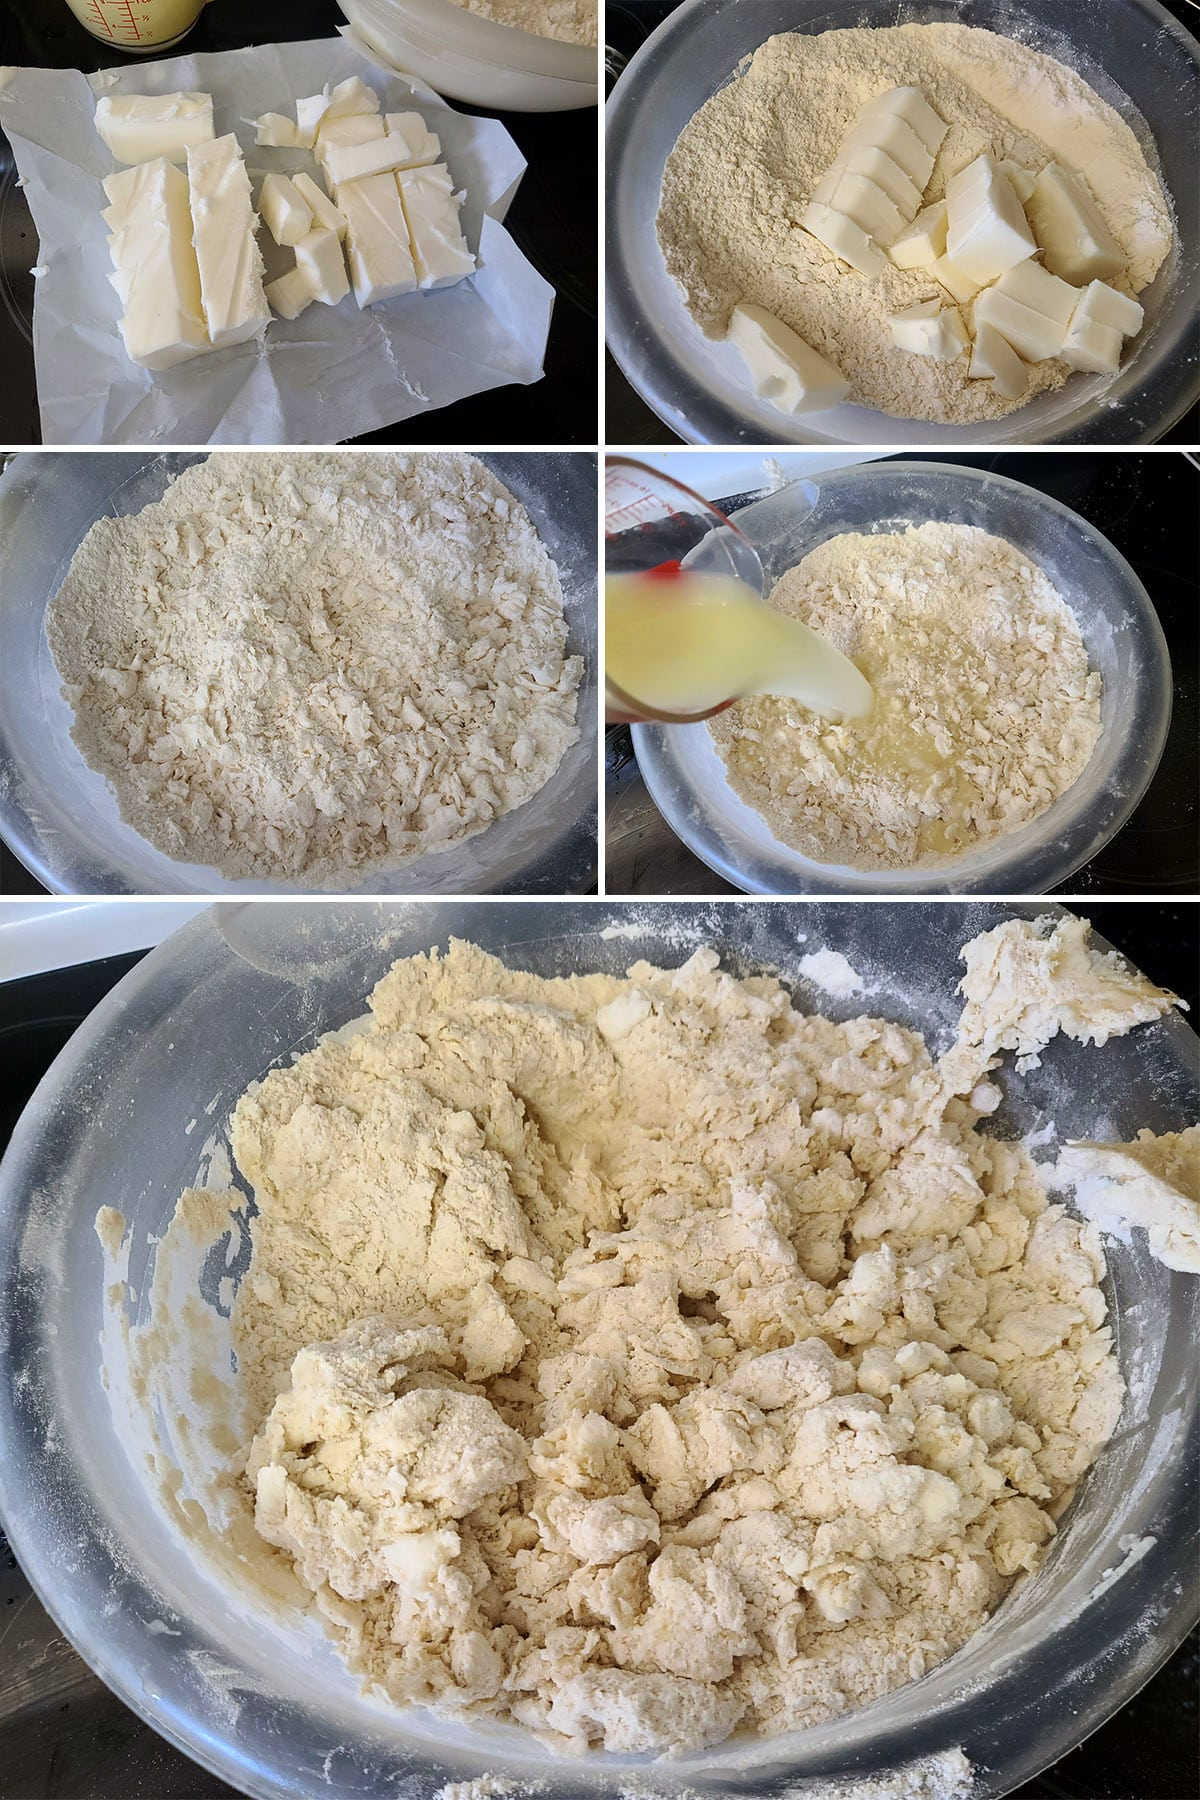 A 5 part image showing the lard and water being mixed into the dry ingredients.